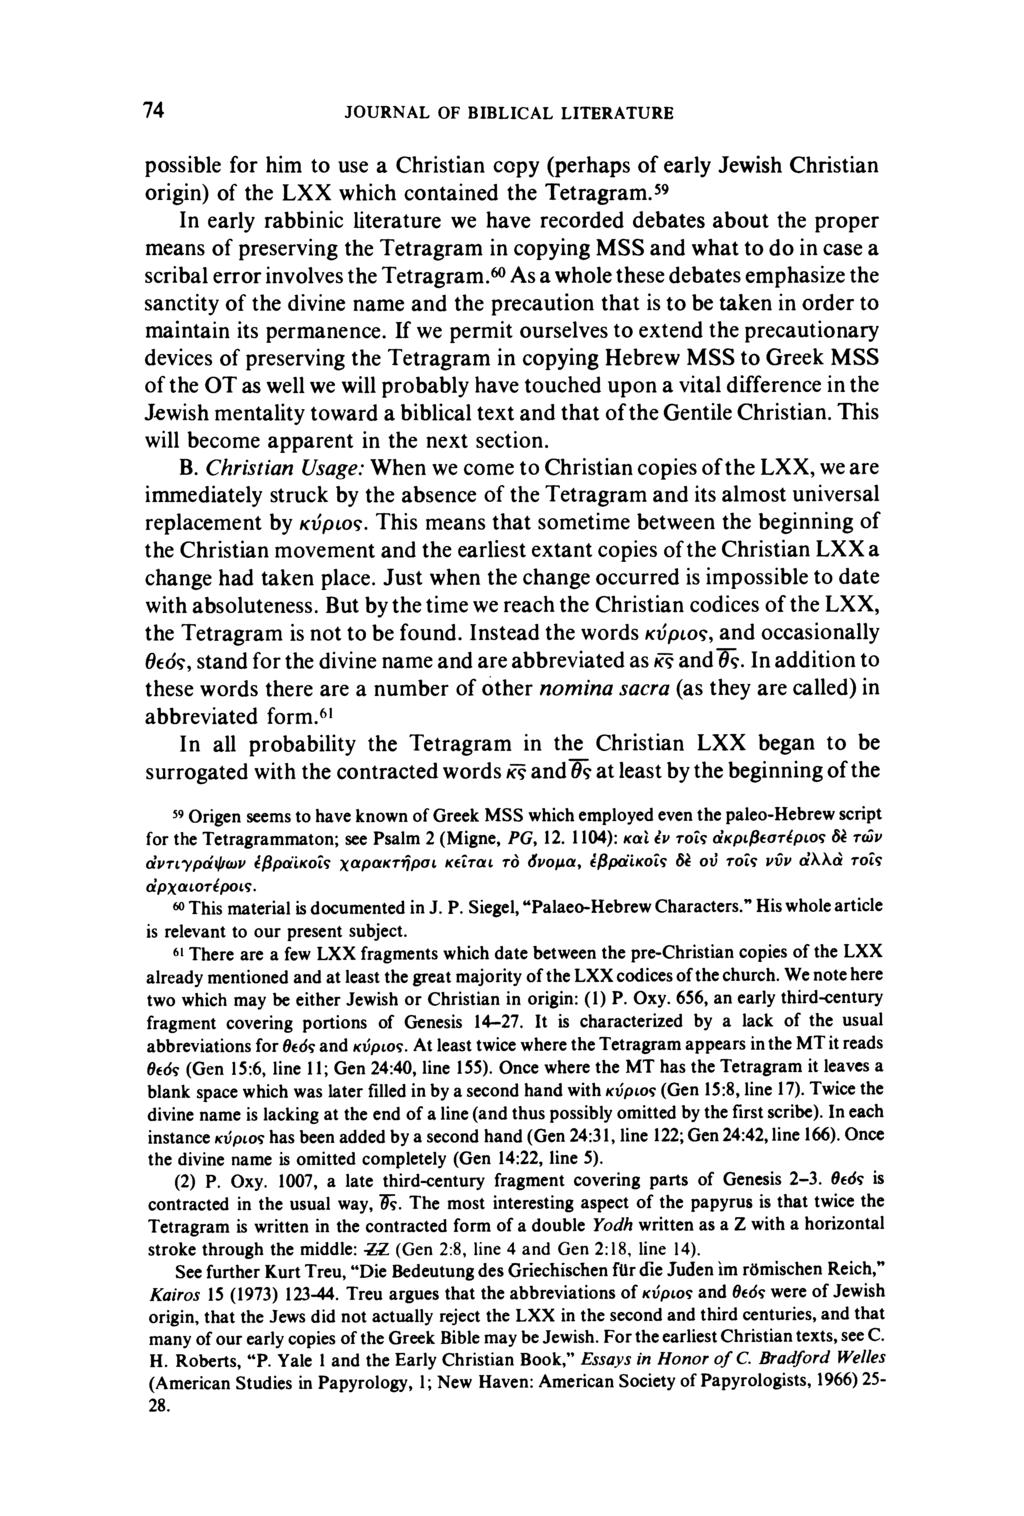 74 JOURNAL OF BIBLICAL LITERATURE possible for him to use a Christian copy (perhaps of early Jewish Christ origin) of the LXX which contained the Tetragram.